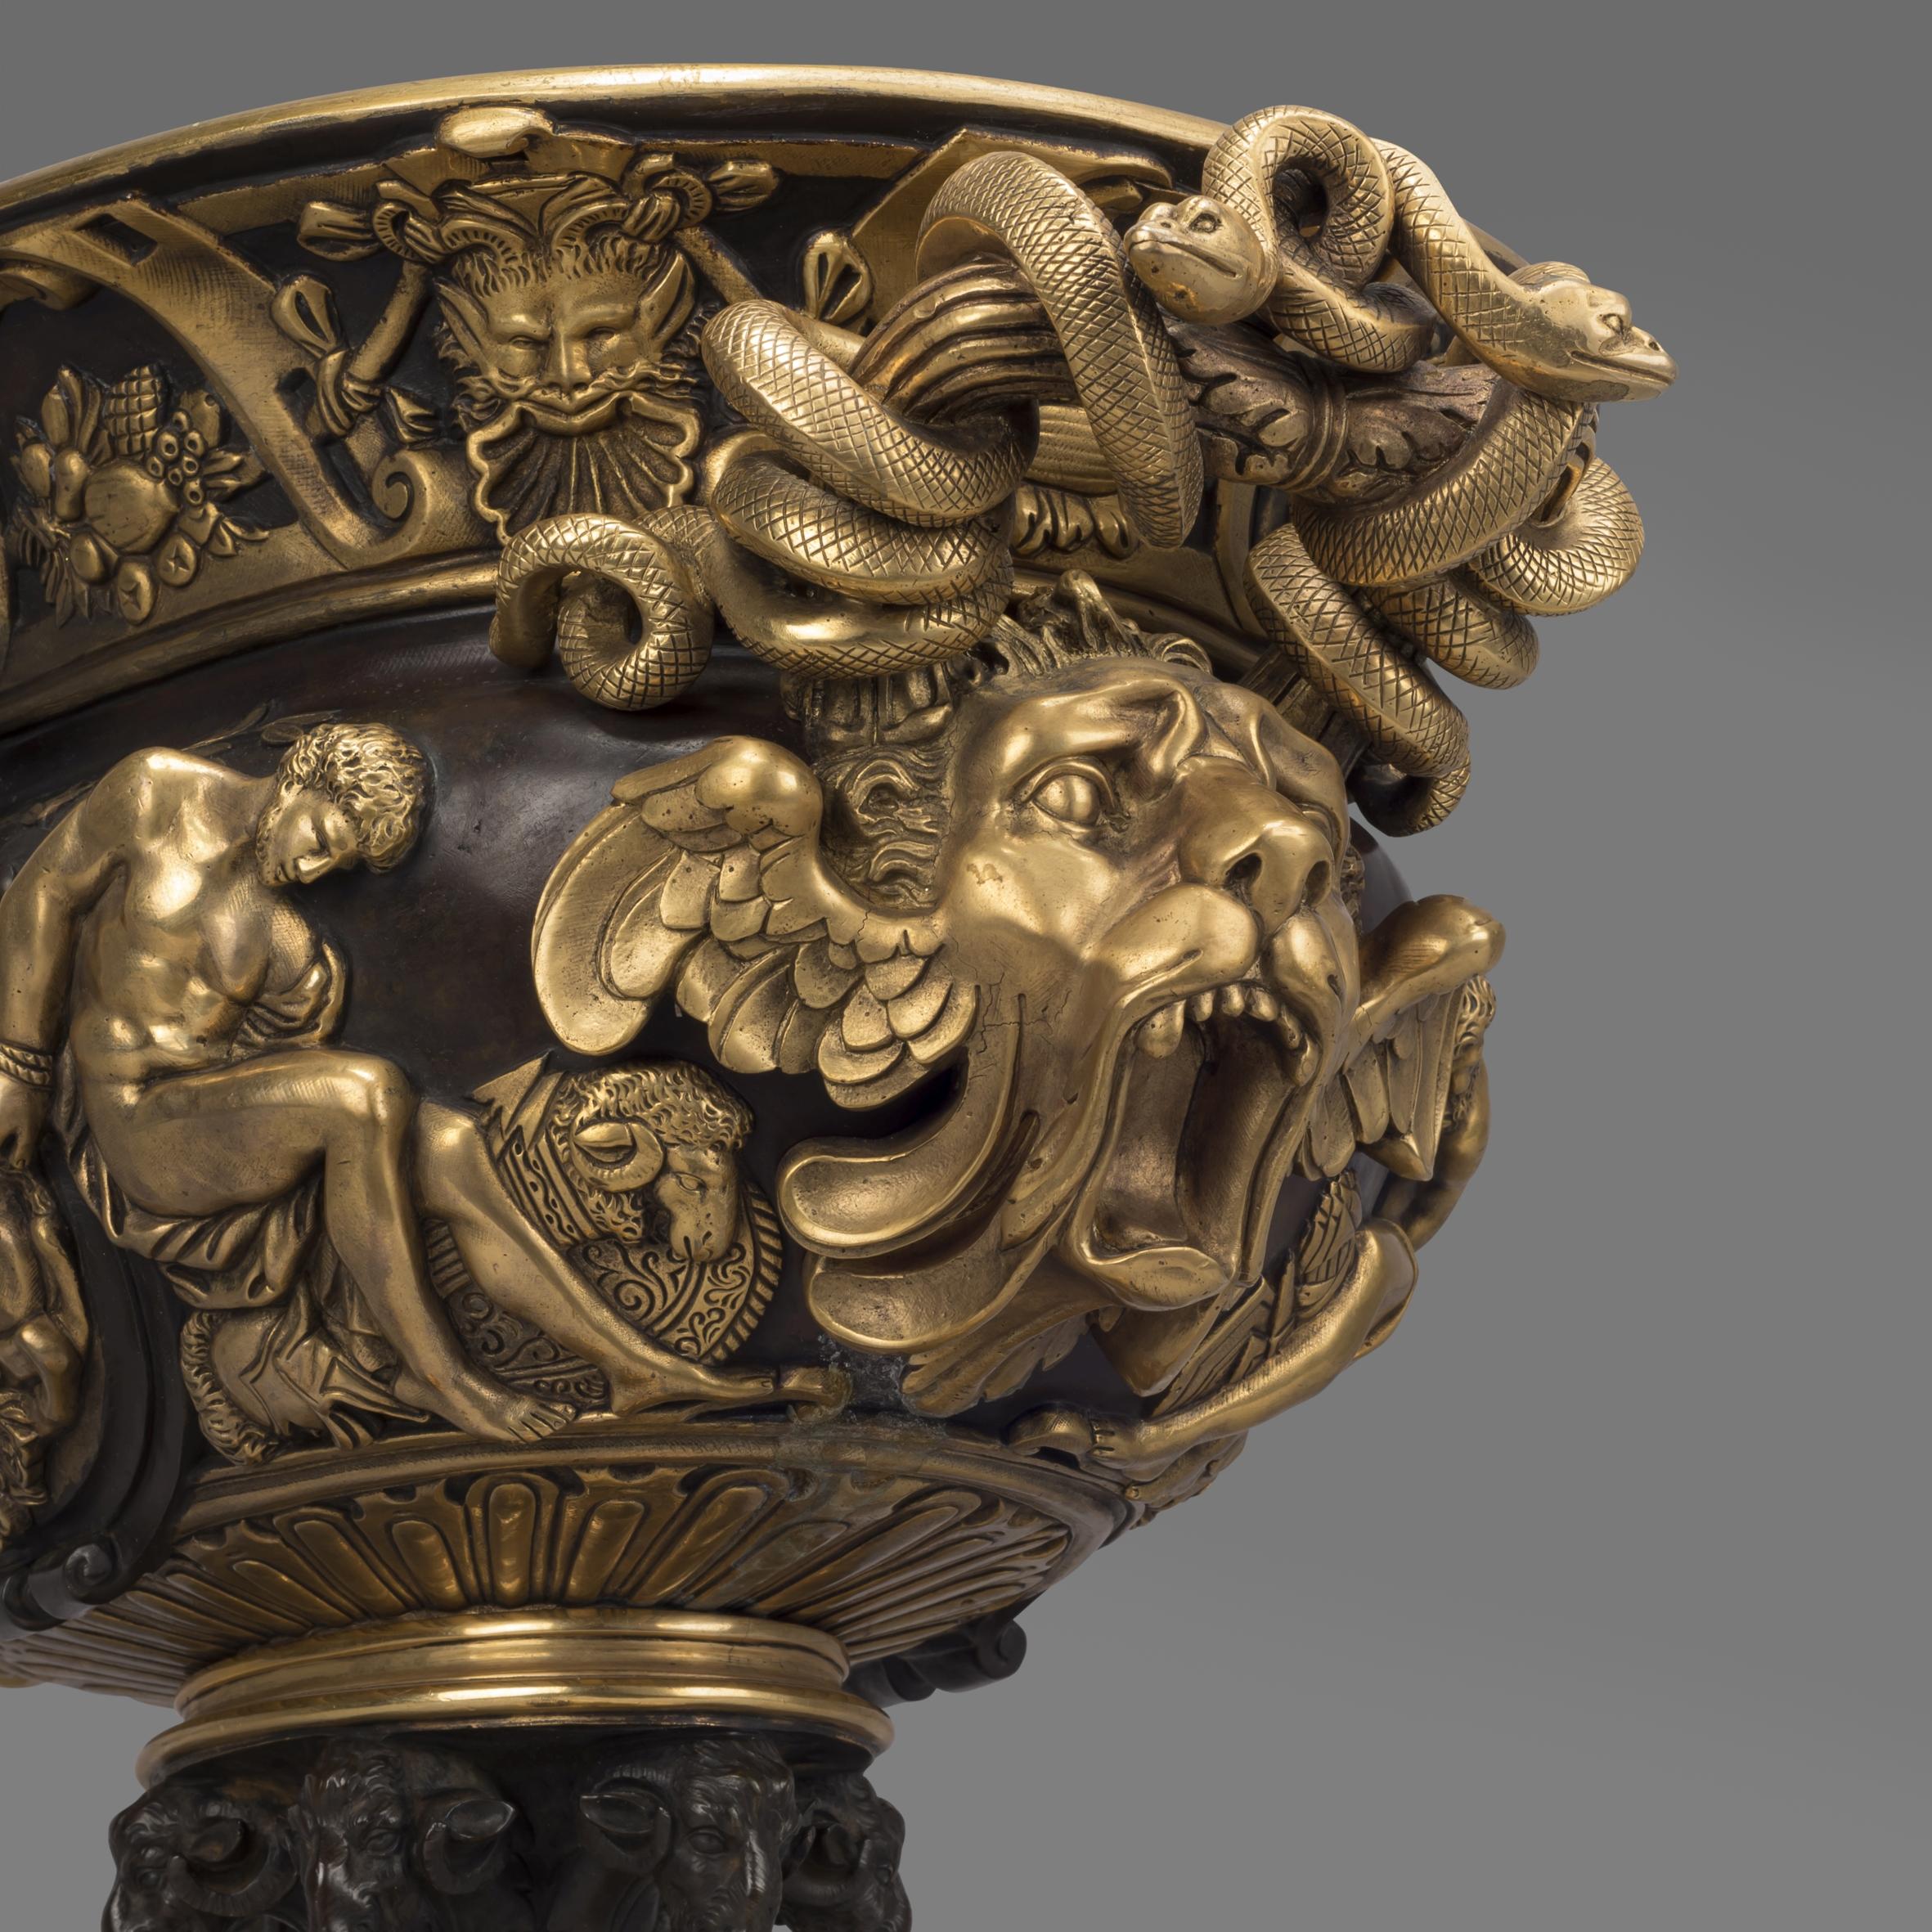 A large and finely cast gilt and patinated bronze neoclassical style vase.

This impressive vase is of oval shape with gilt and patinated bronze decoration of classical figures and motifs. The handles formed as entwined snakes and winged lion